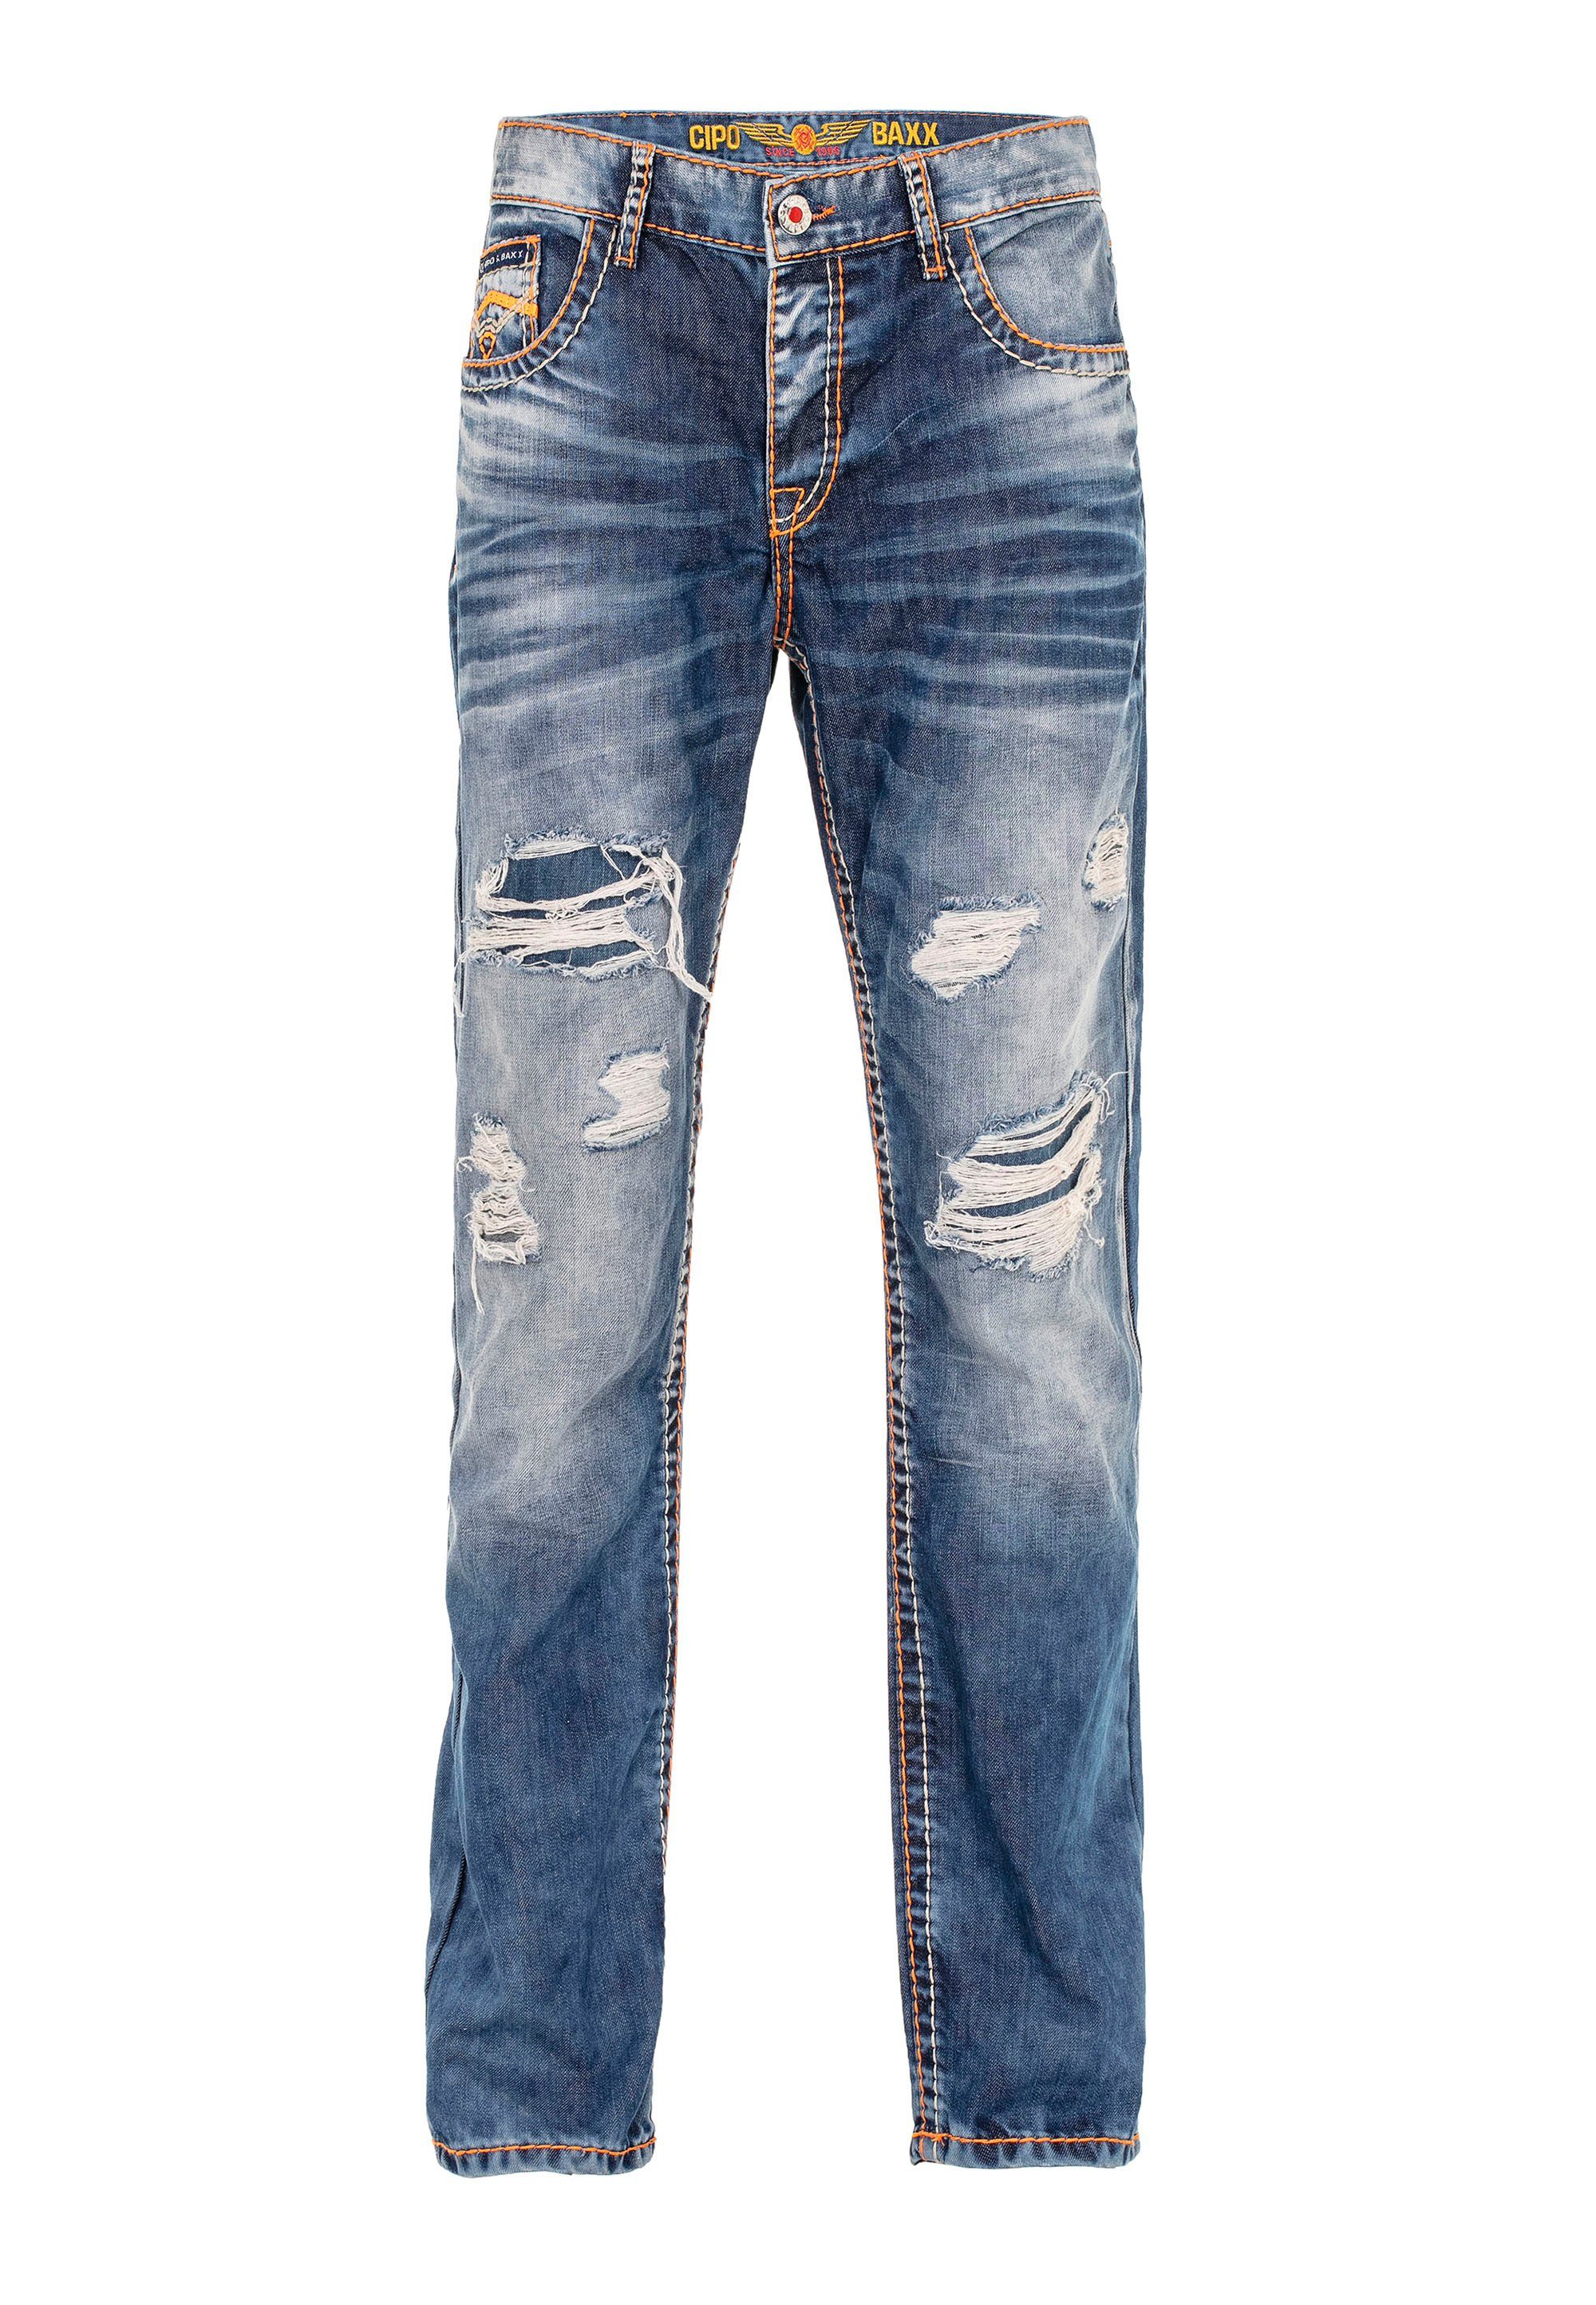 Cipo & Baxx Bequeme Jeans Destroyed-Look im